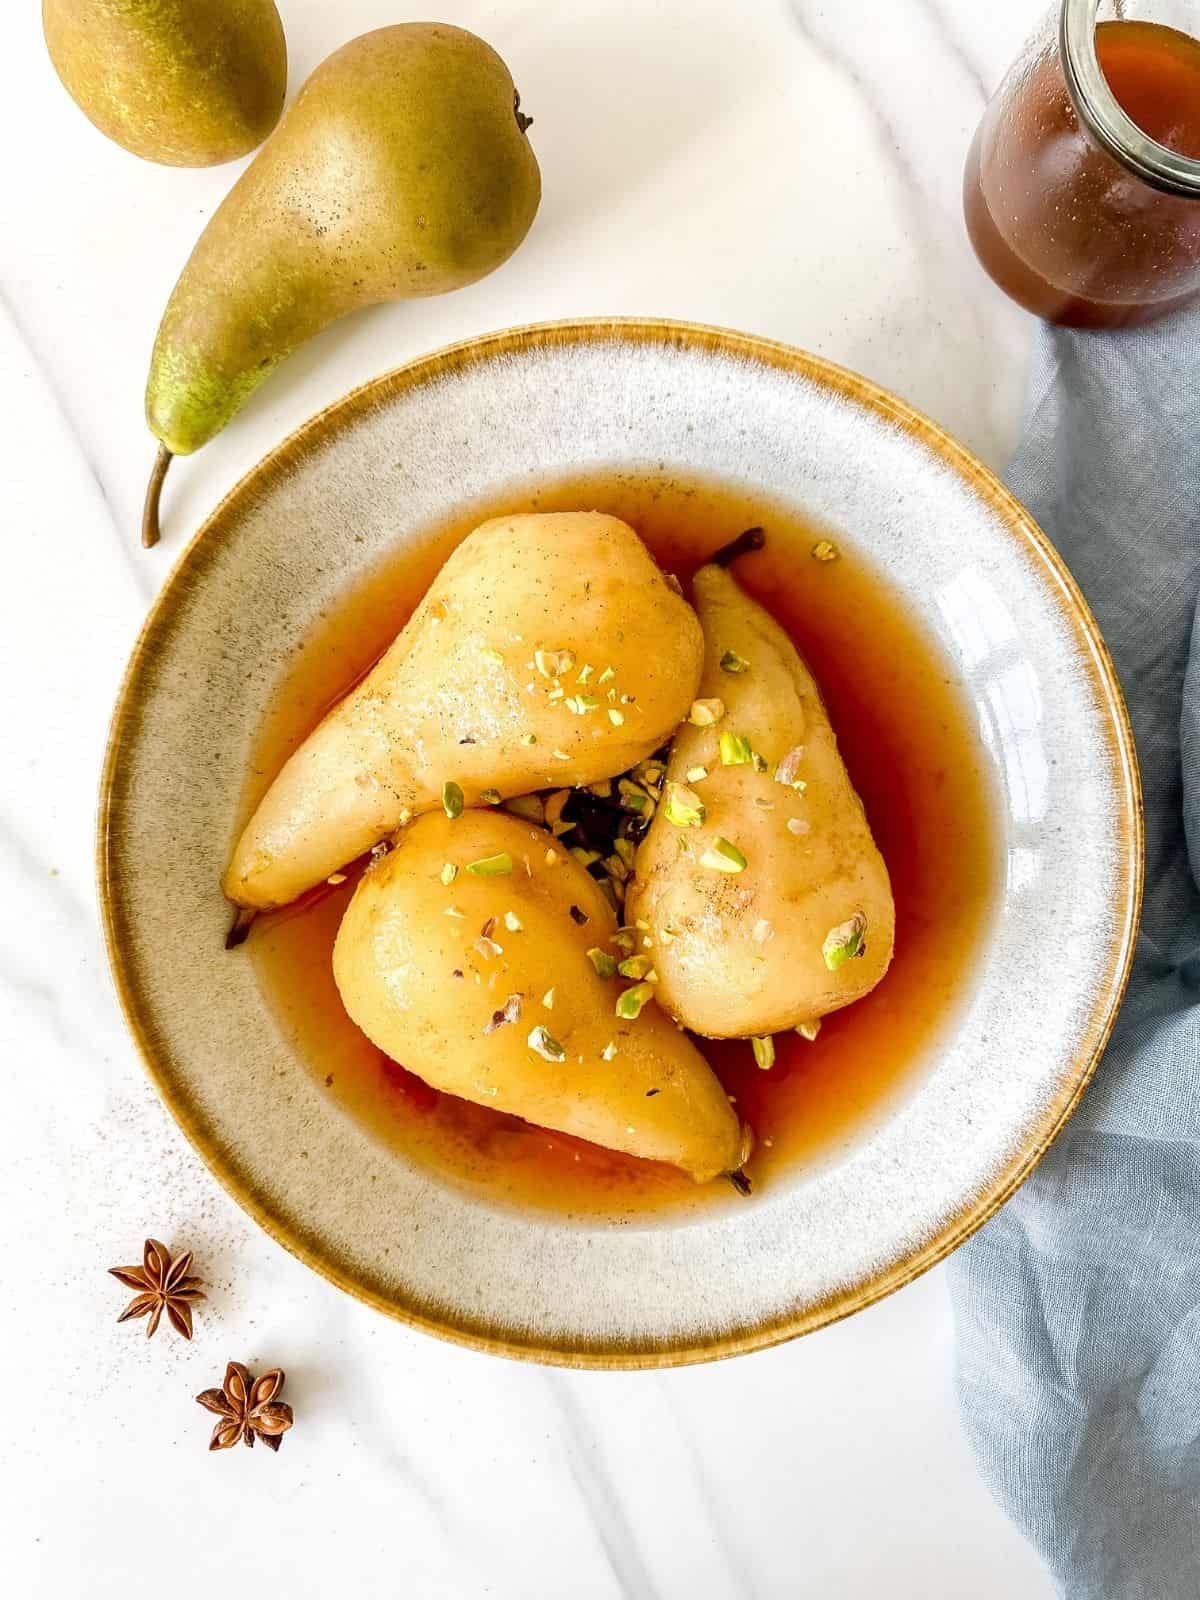 spiced poached pears in a grey bowl with a brown rim next to pears and star anise.